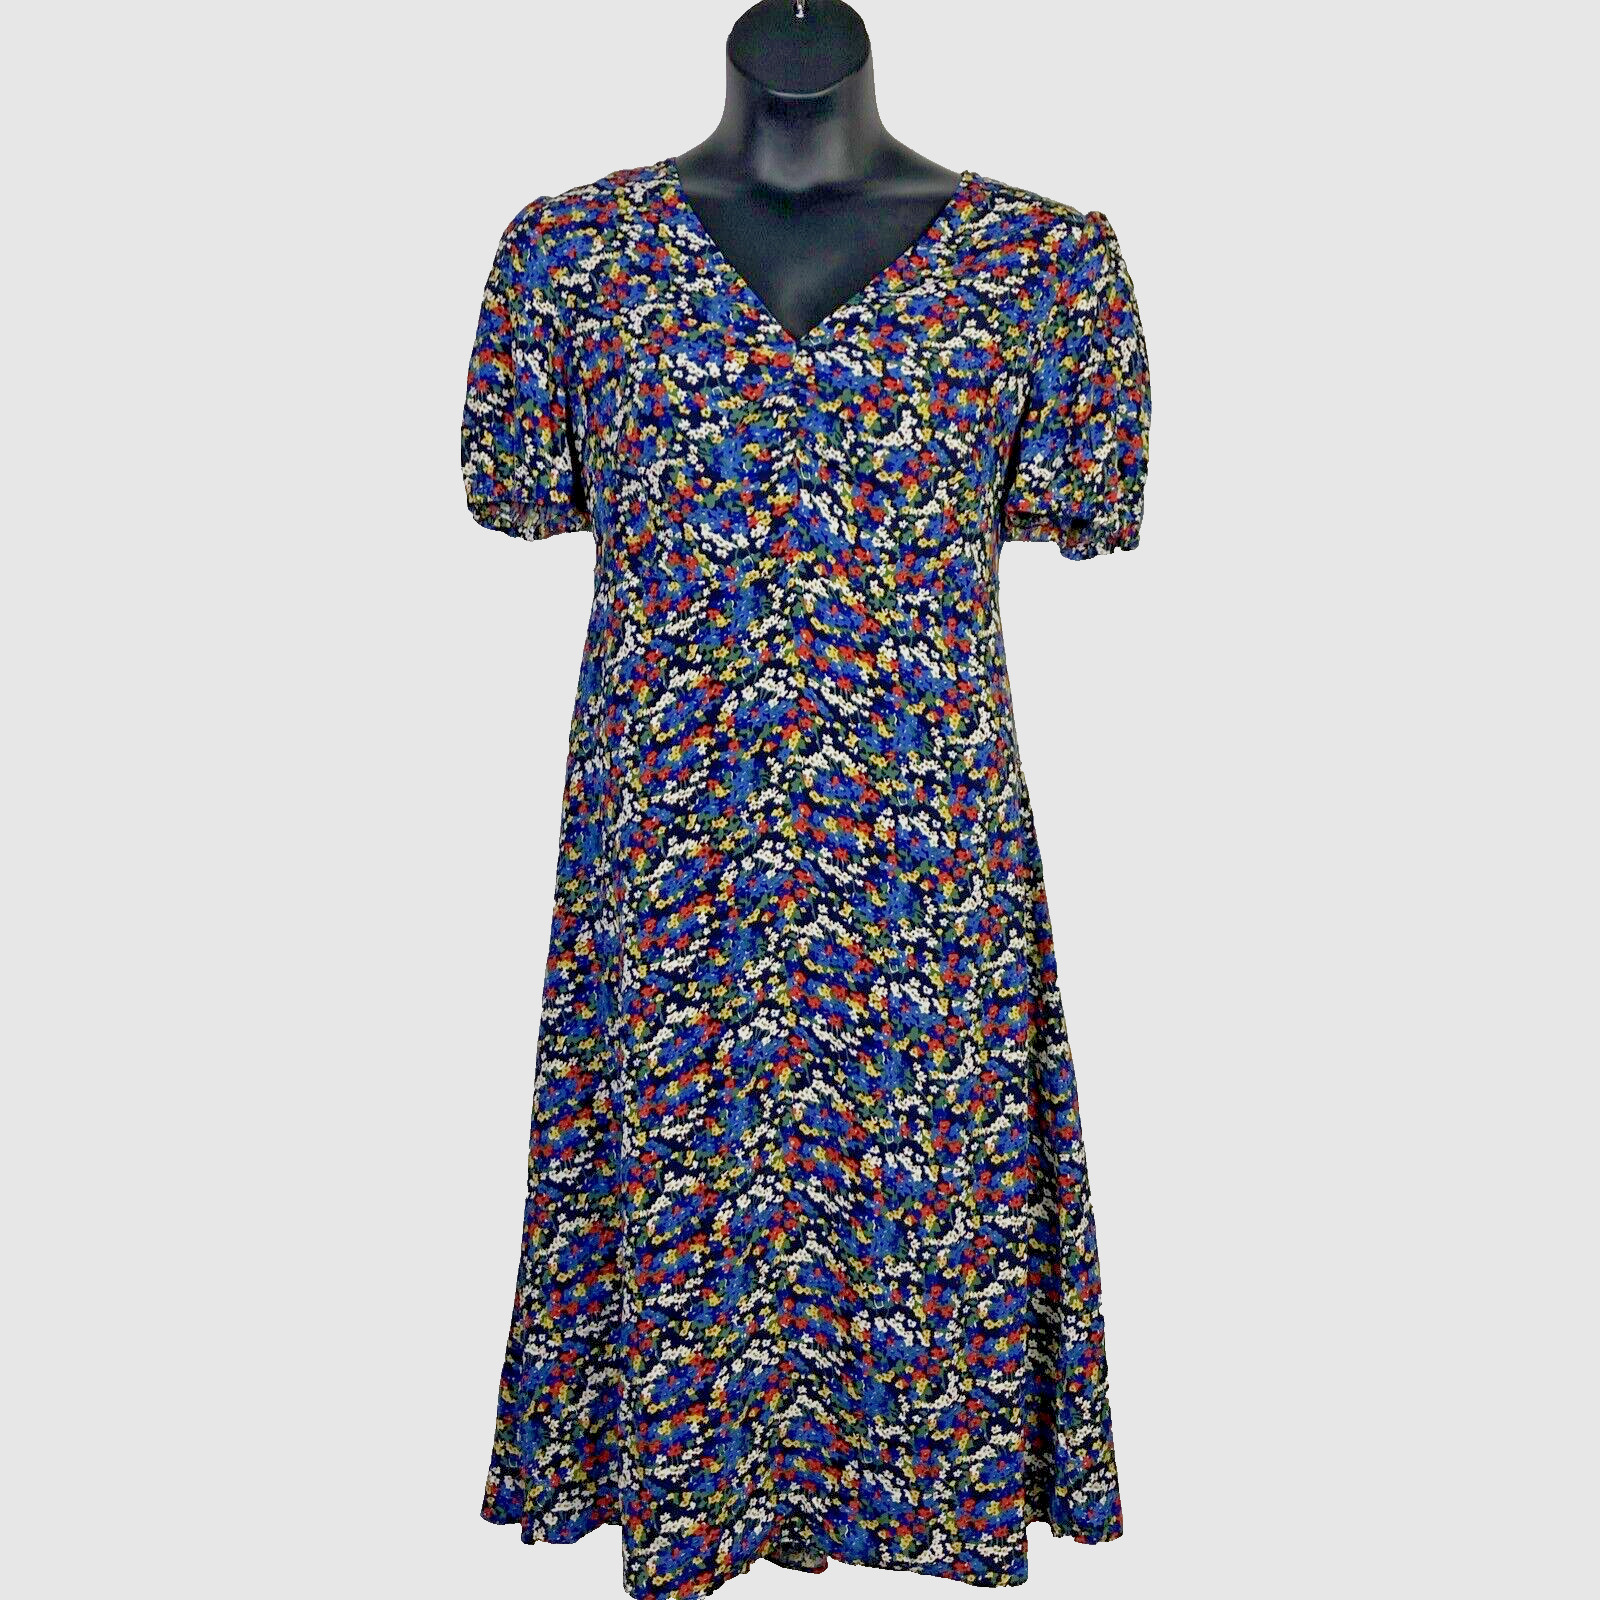 Boden Tessa Midi Dress US 14 French Broad Bean Ditsy Floral Navy Blue Lined ss